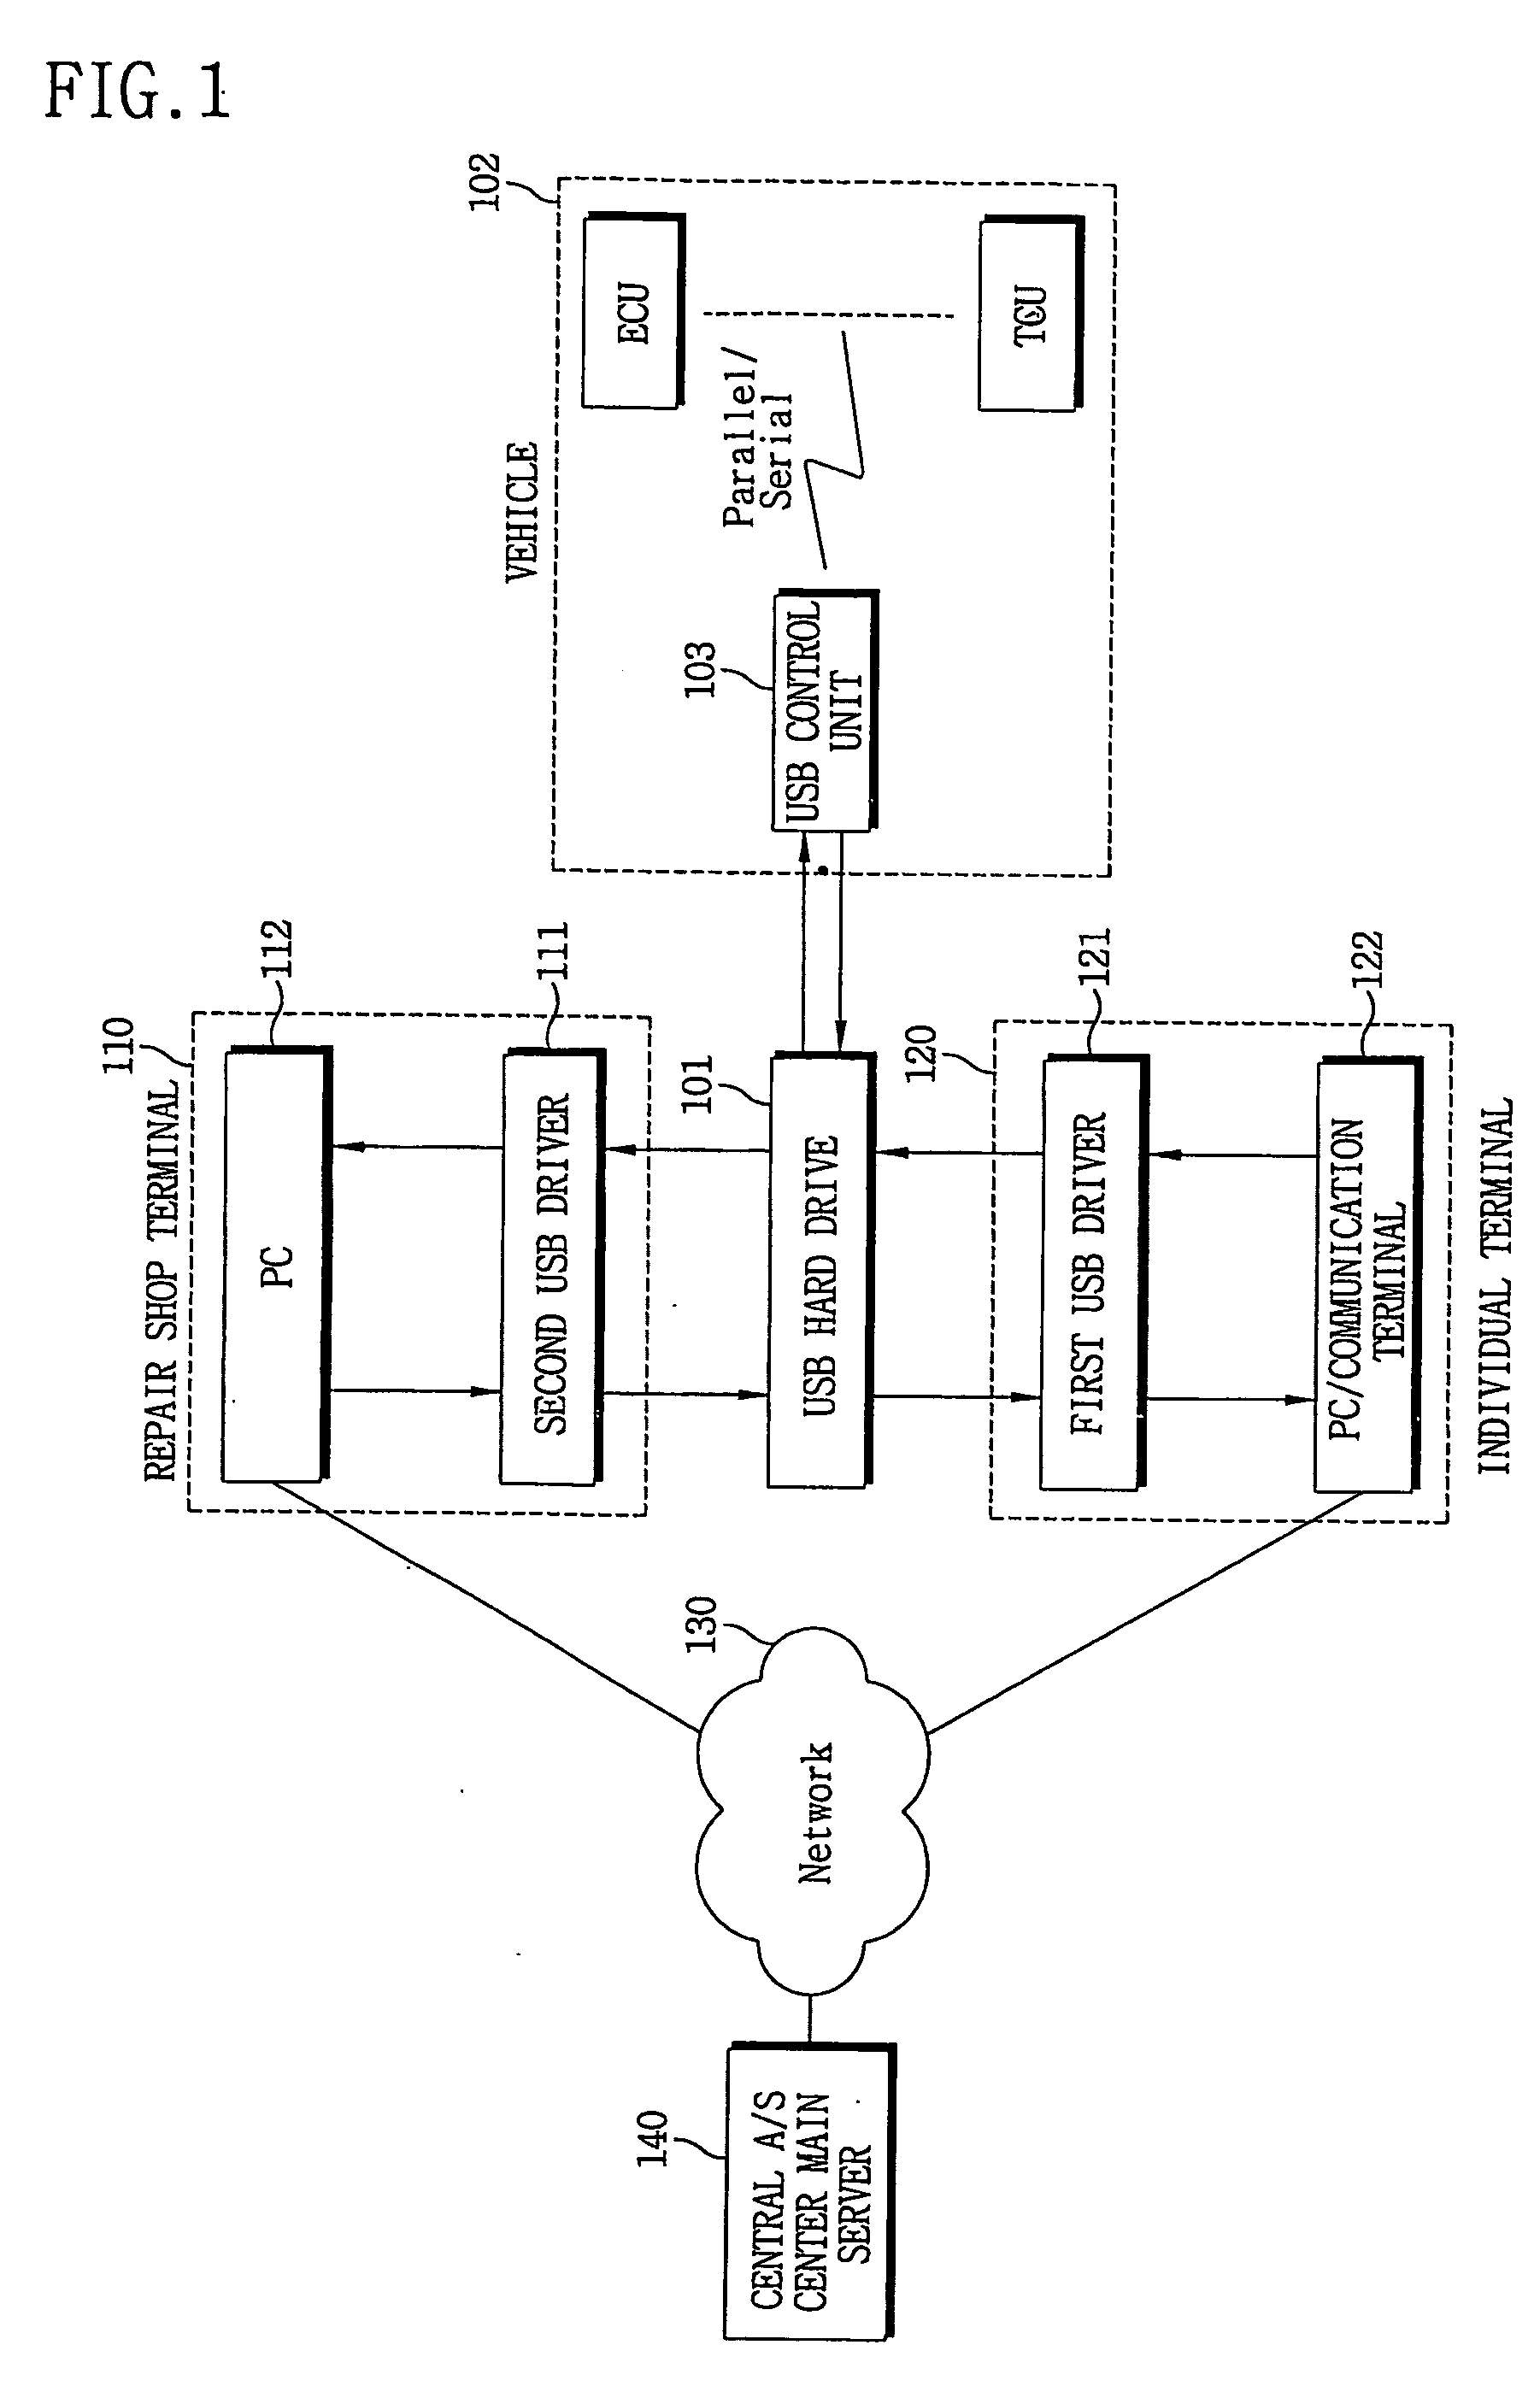 System for collecting vehicle data and diagnosticating the vehicle using USB hard drive